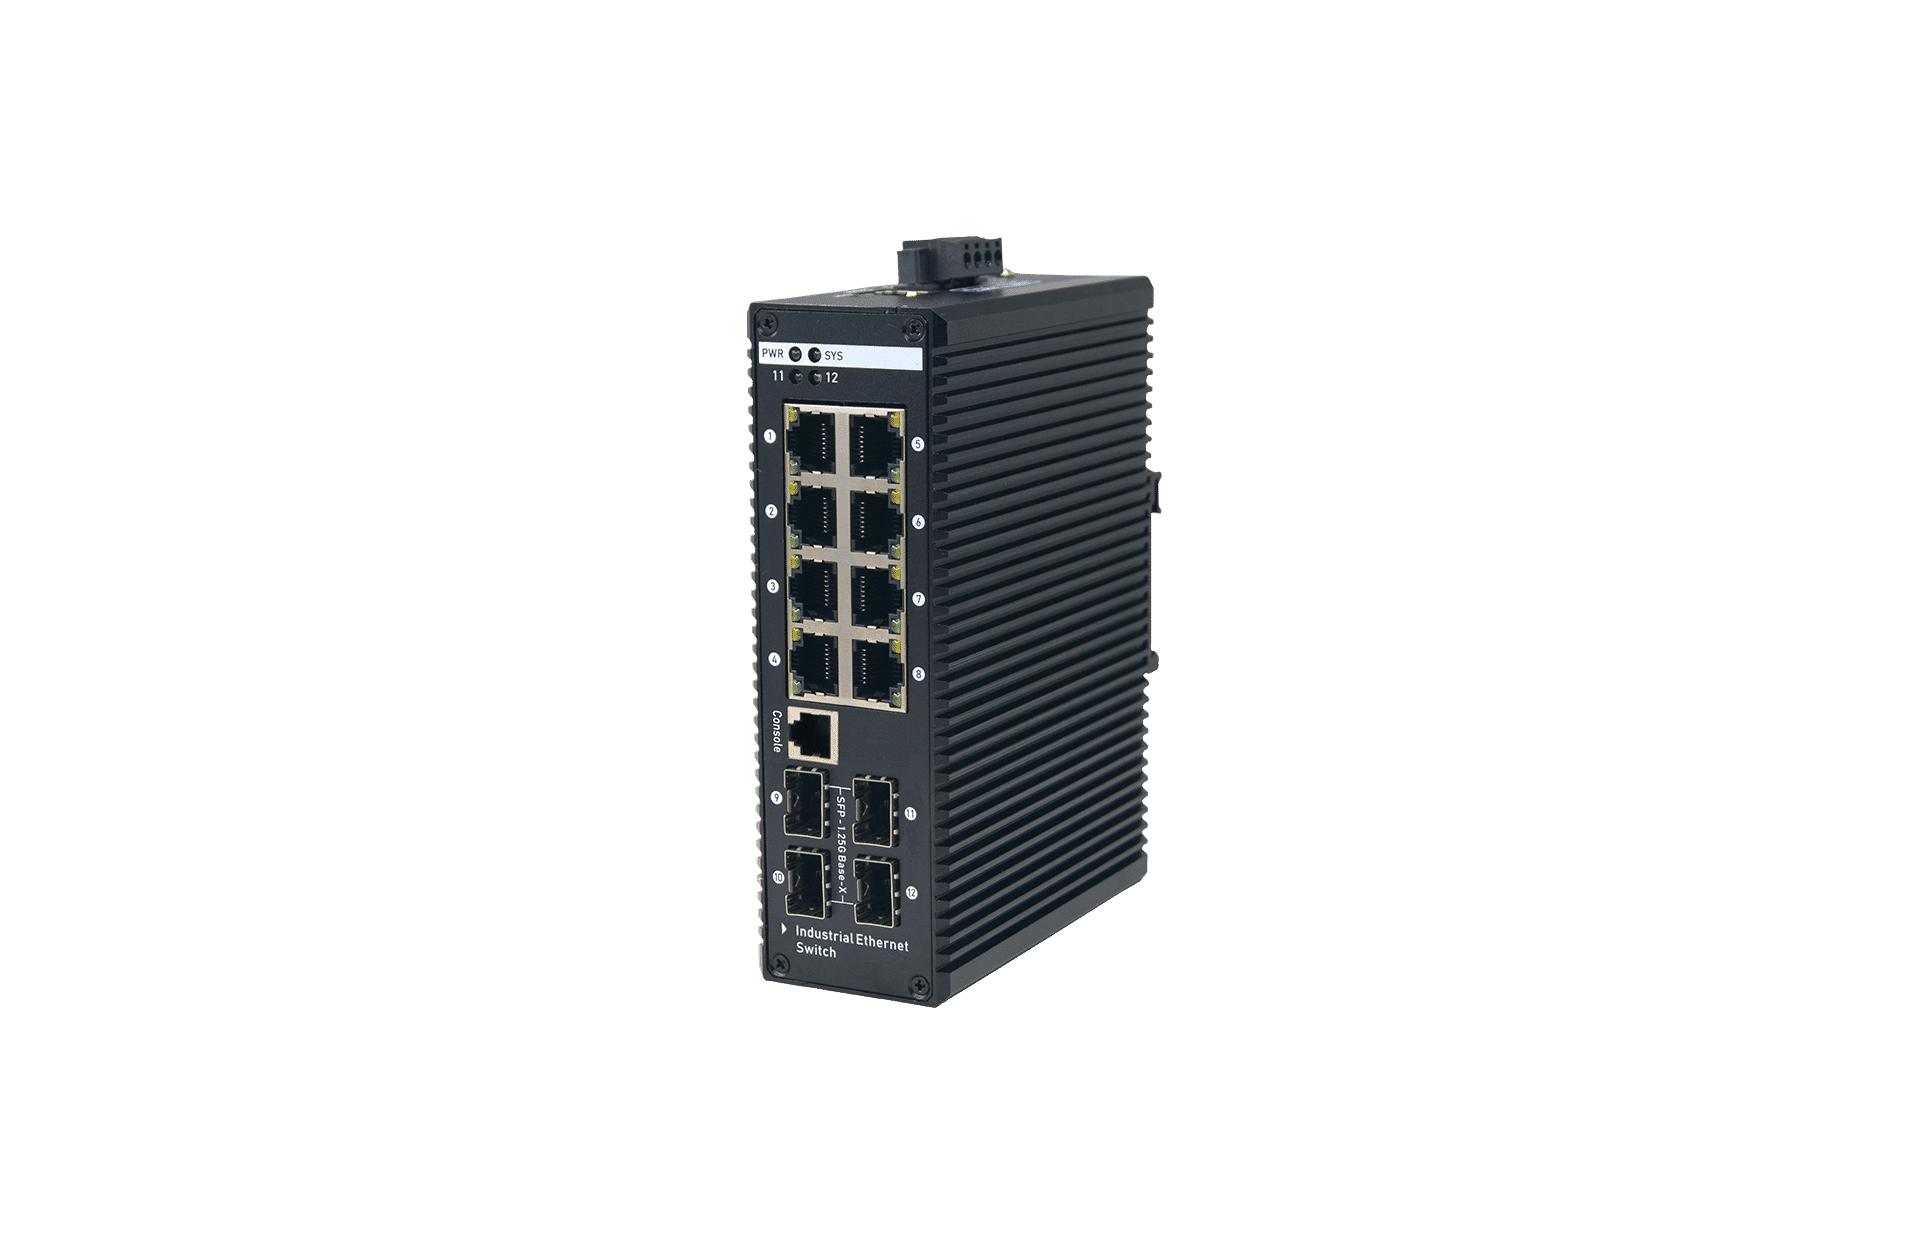 8 Ports 10/100/1000Mbps Managed Industrial PoE Switch with 4 Gigabit SFP